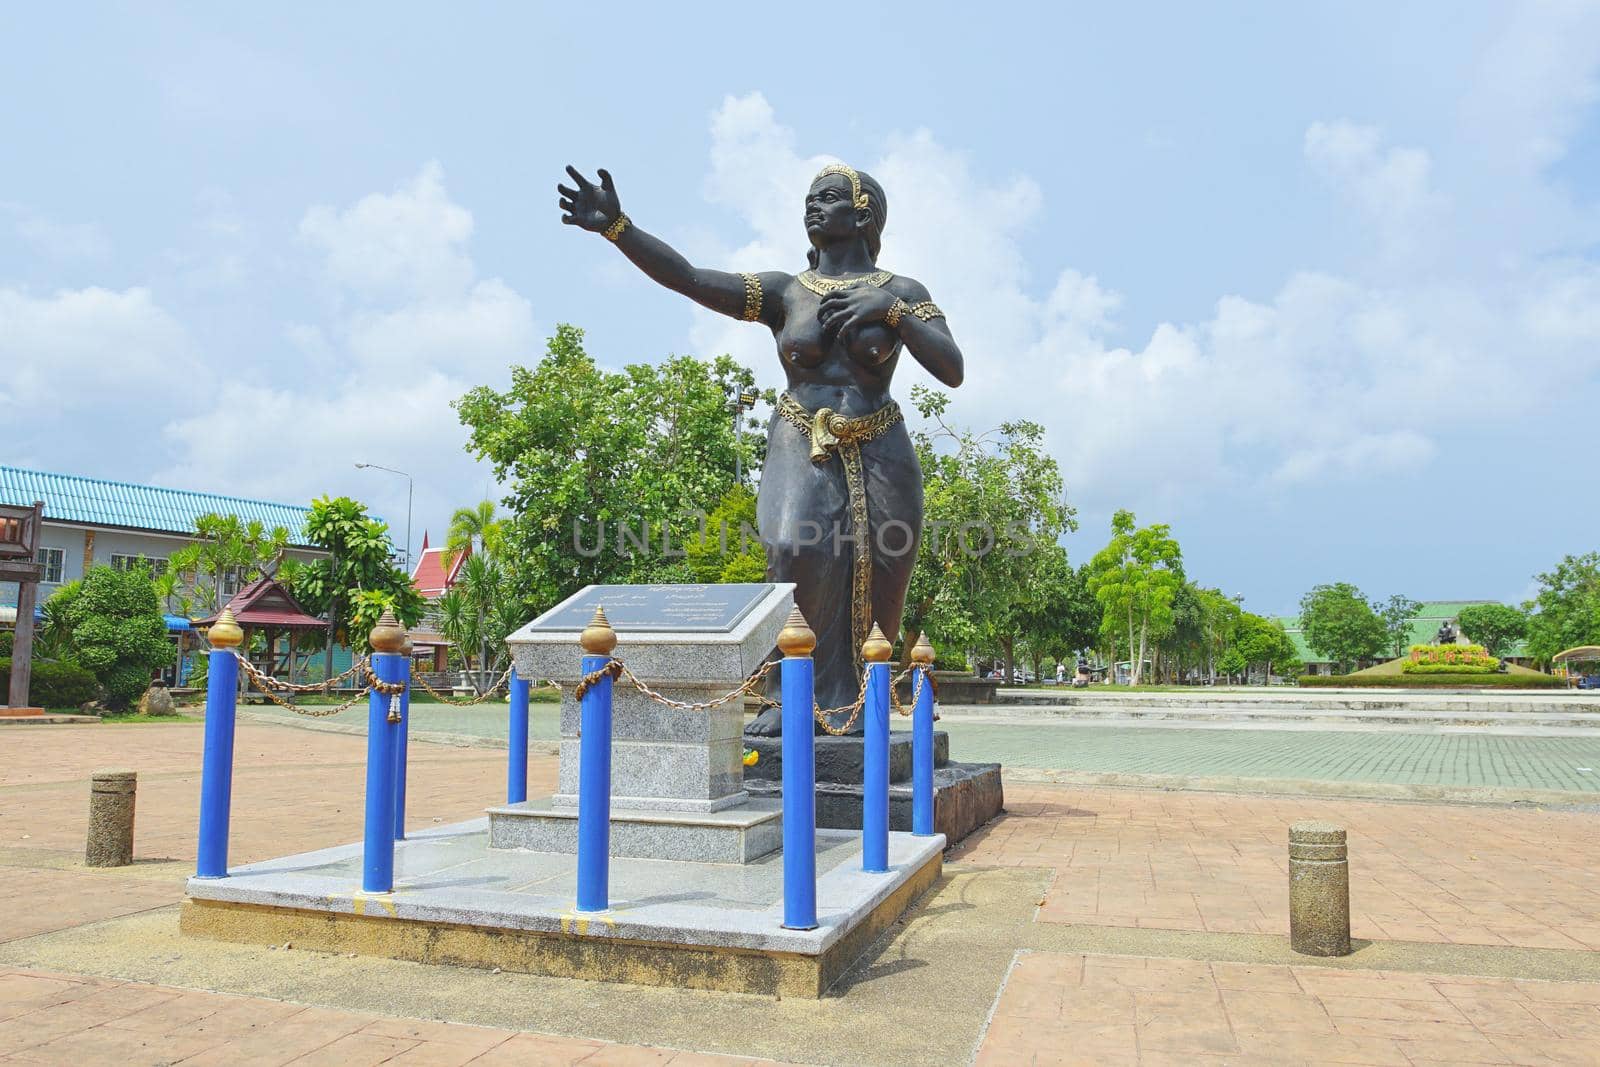 Statue of Nang Phisuea Samudr in Rayong, Thailand. by Desatit